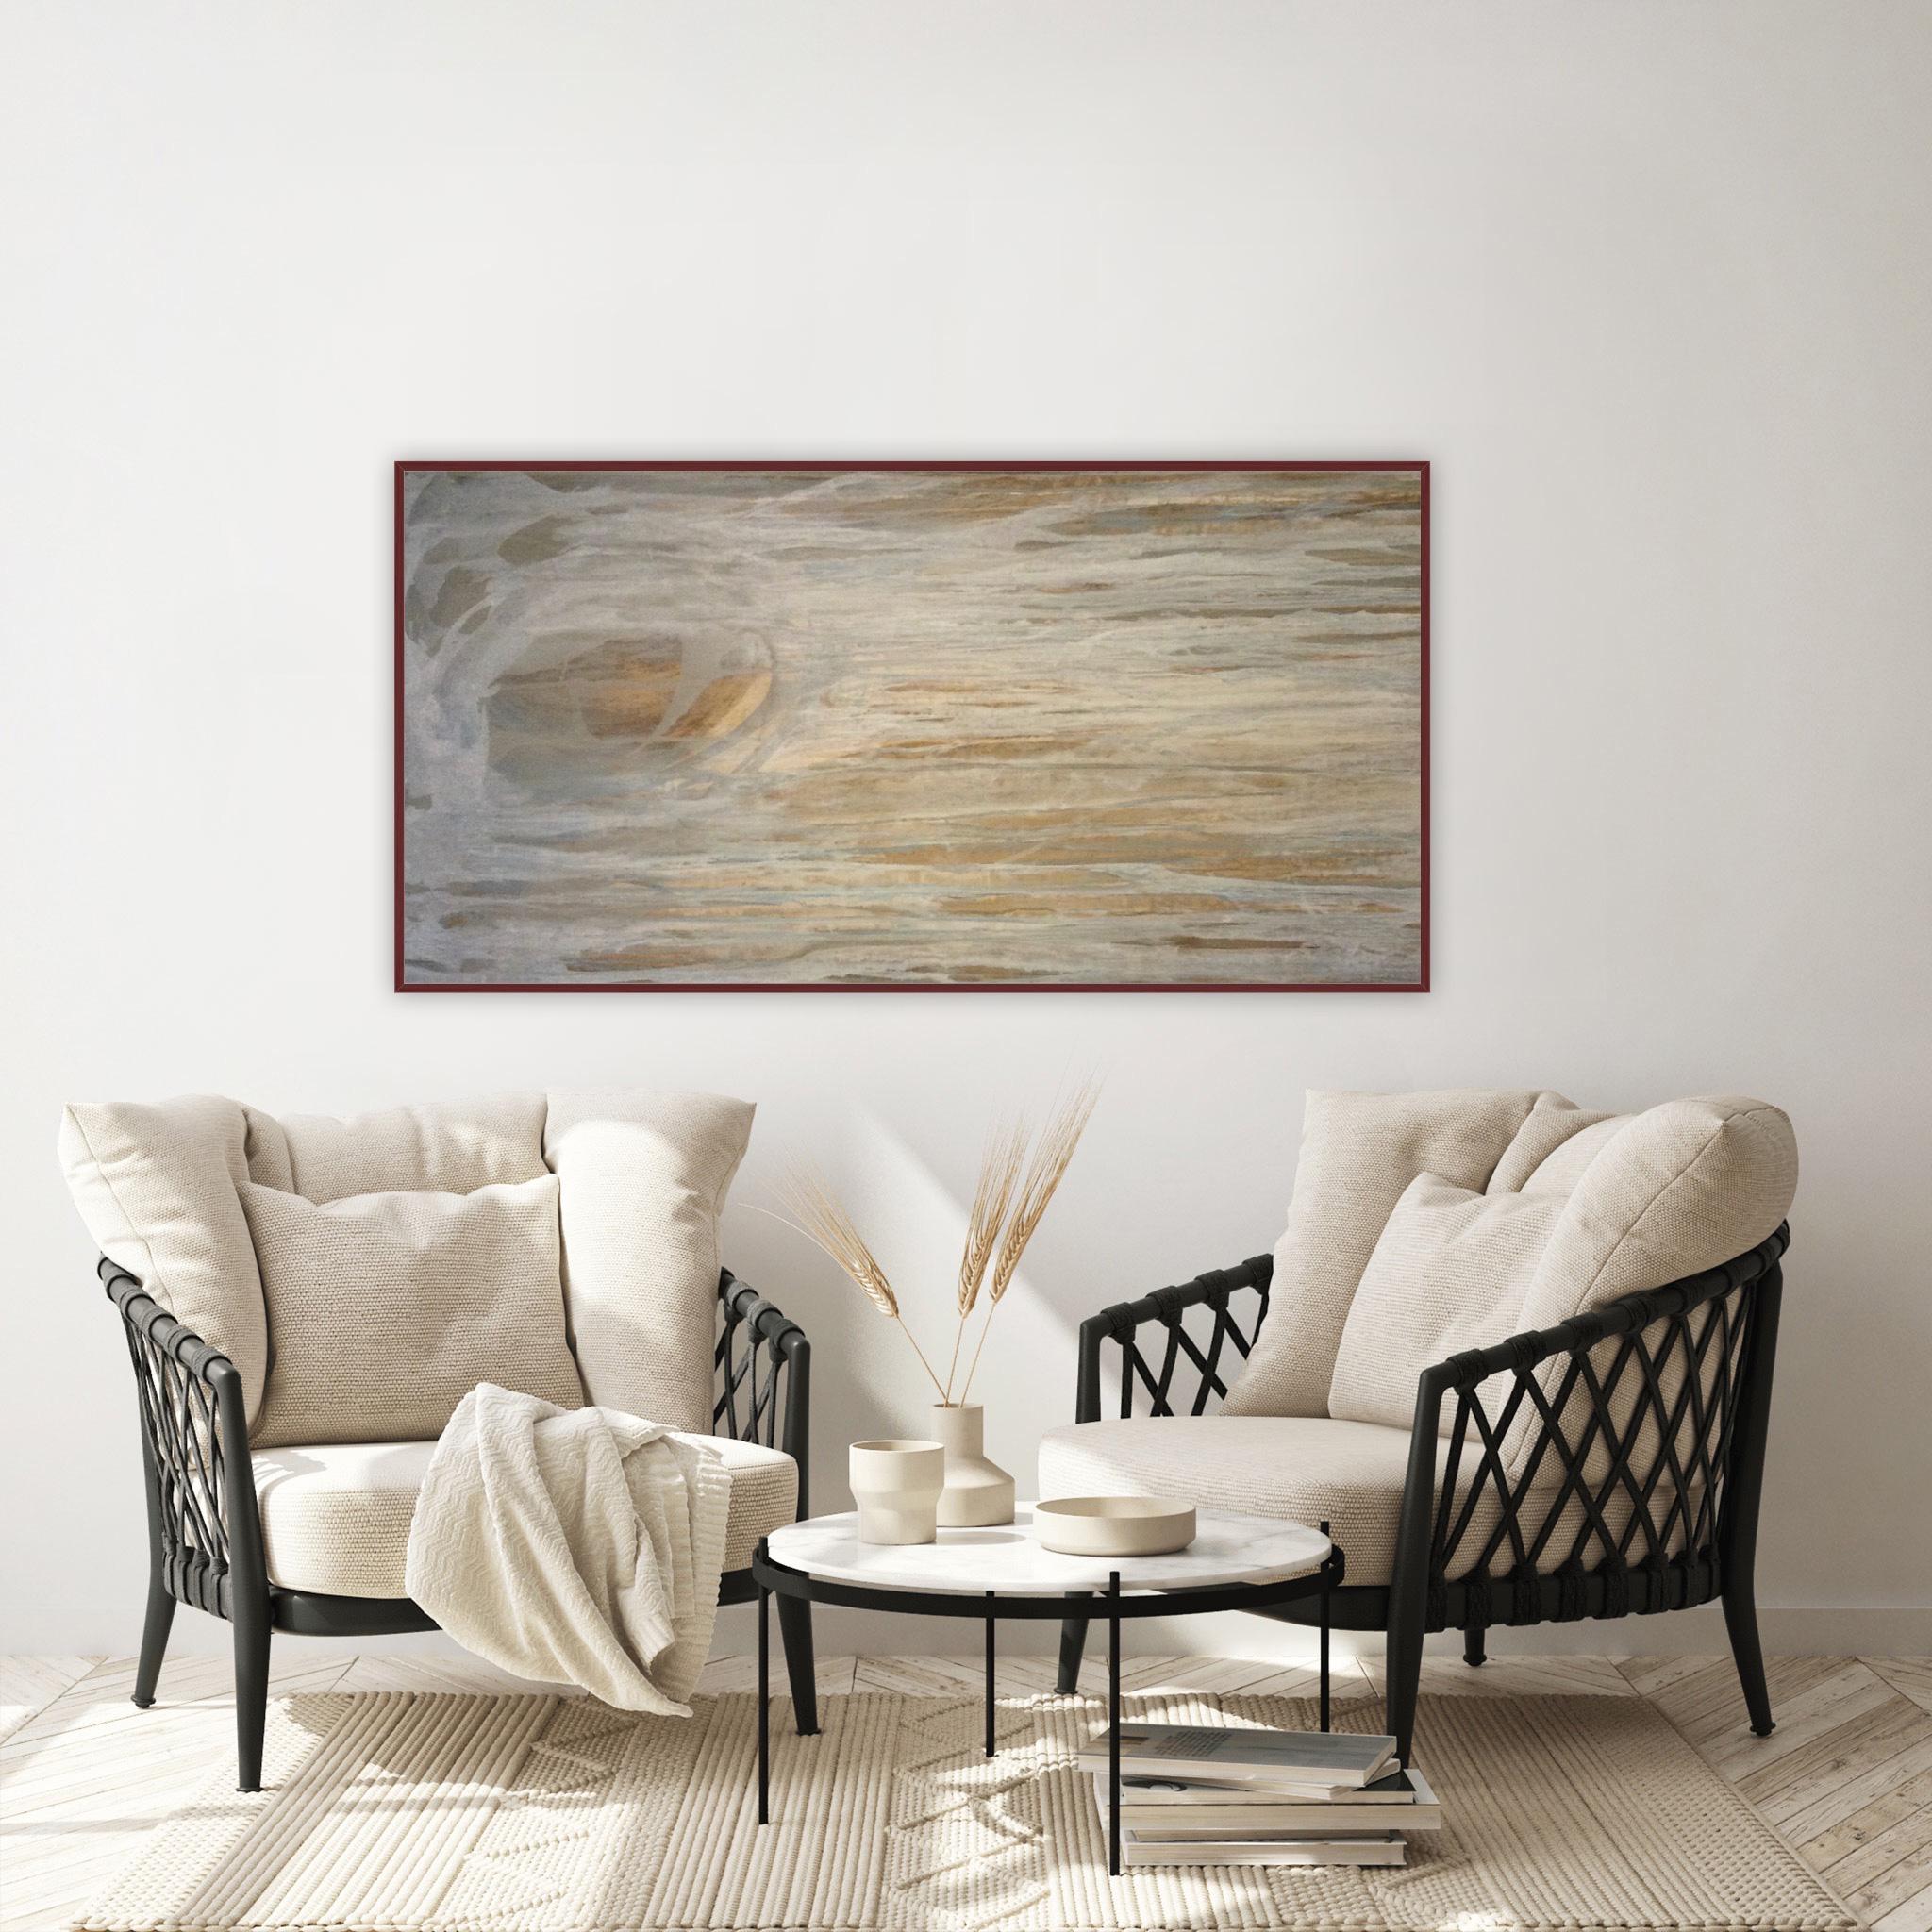 Zion 3 Contemporary Neutral Abstract Canvas Painting By Debra Ferrari 5